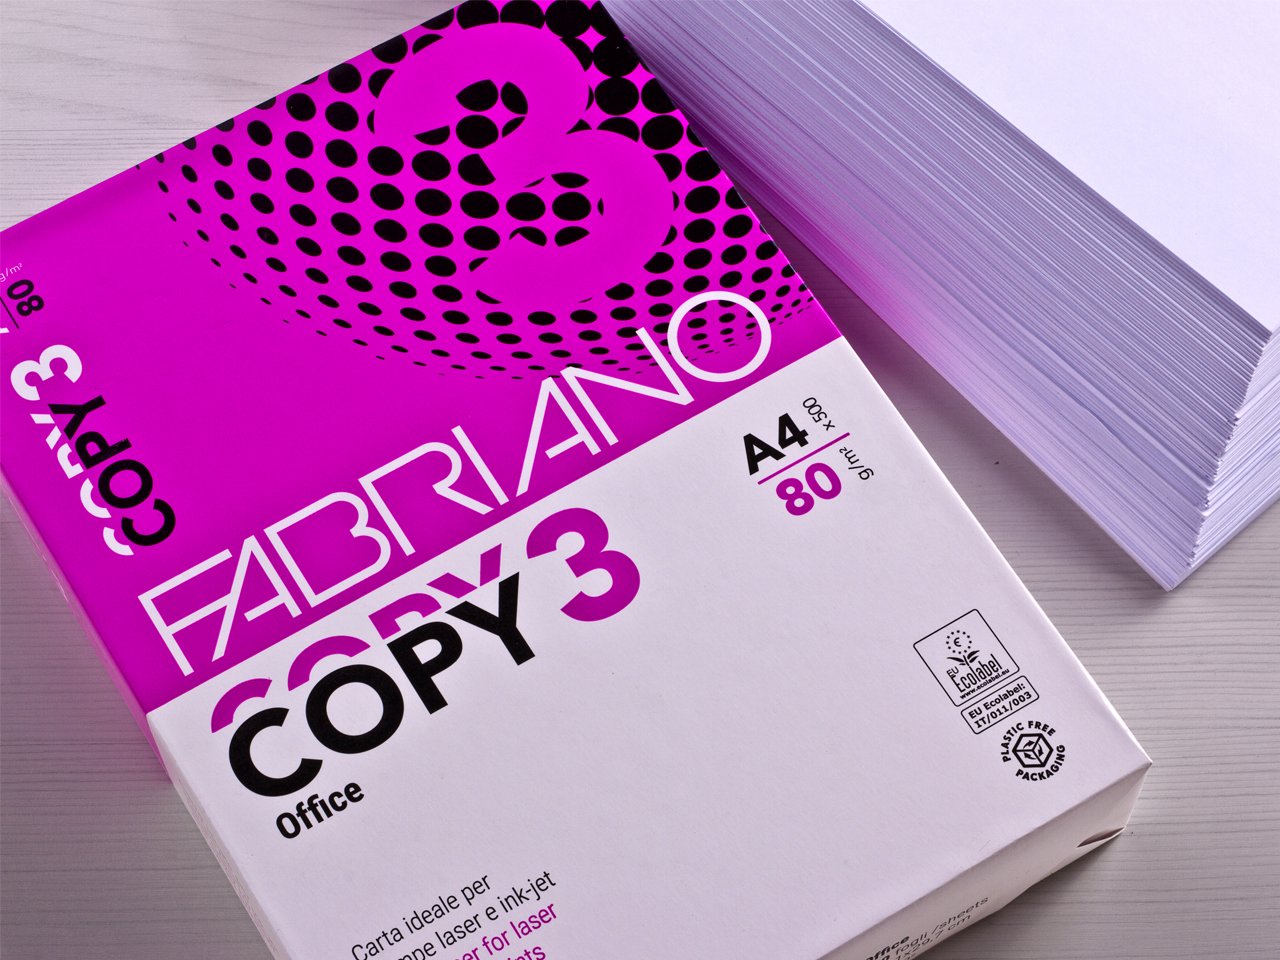 Copy 3, paper for photocopies, laser/inkjet printing, fax, office